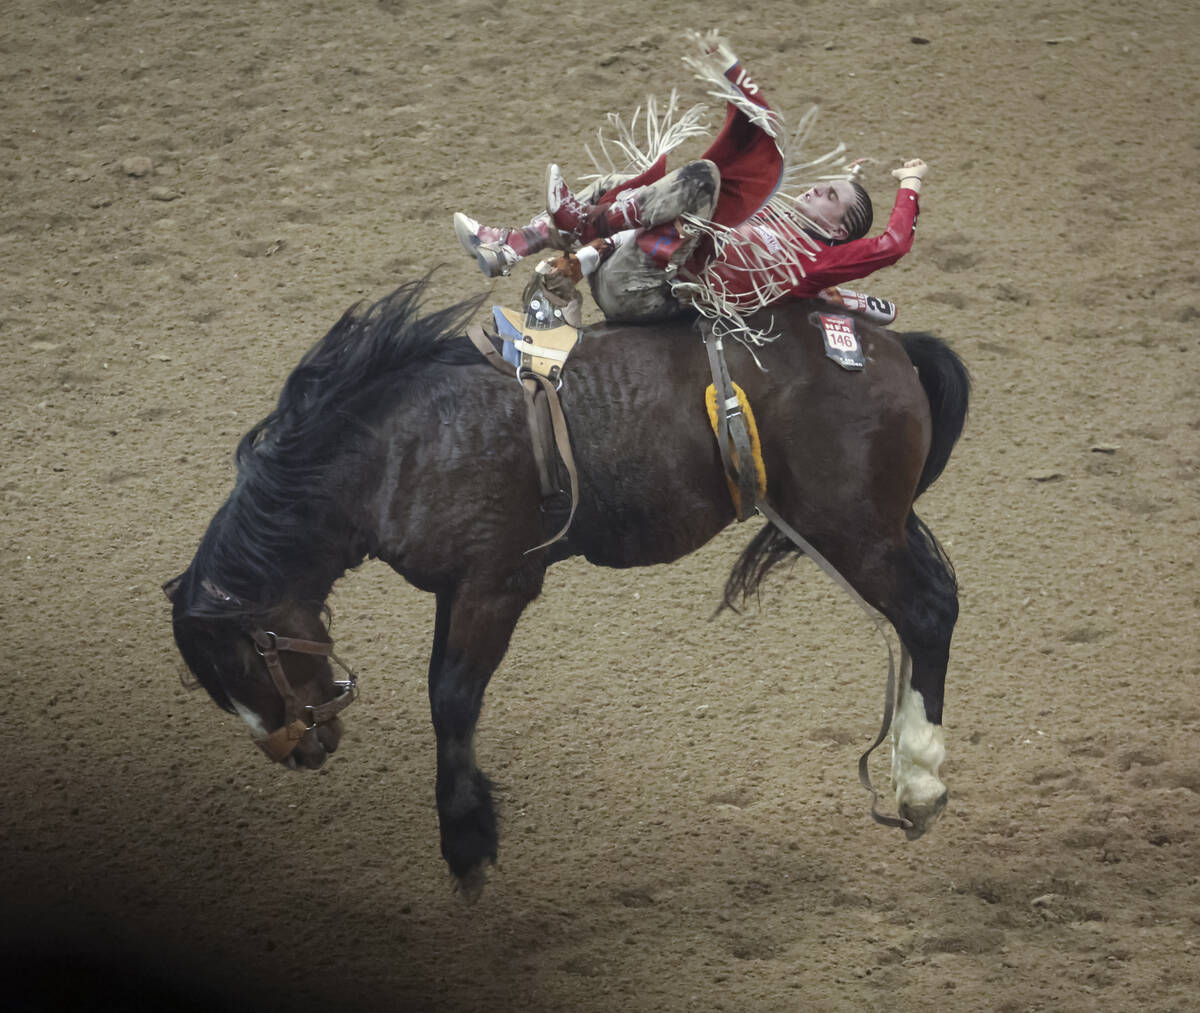 Rocker Steiner, of Weatherford, Texas, competes in bareback riding during the fifth go-round of ...